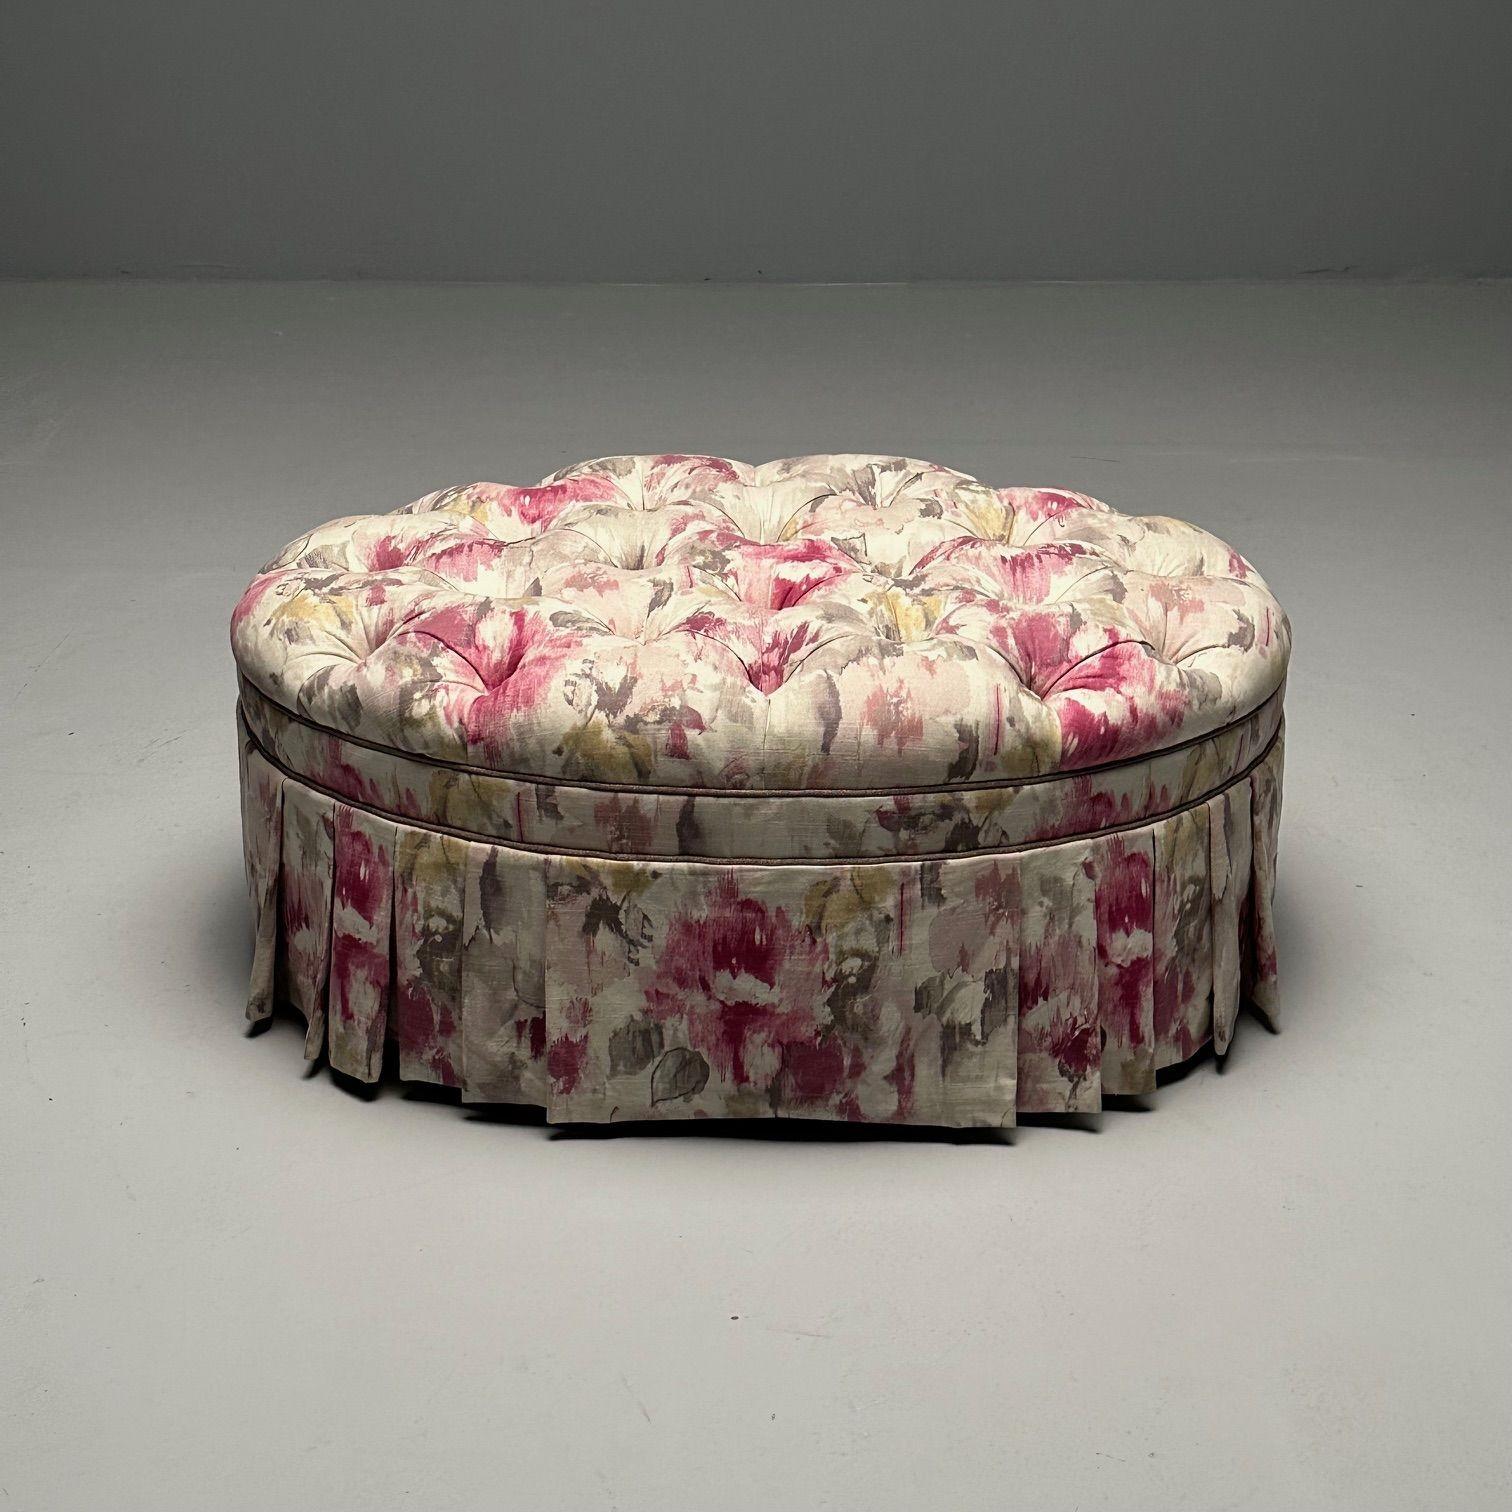 Traditional, Oval Tufted Ottoman or Pouf, Tie Dye Floral Fabric, Wood, USA, 2010s

An oval ottoman or footstool having a later tie die upholstery with a floral motif. The top of the ottoman features tufting and a fabric skirt that goes around it's